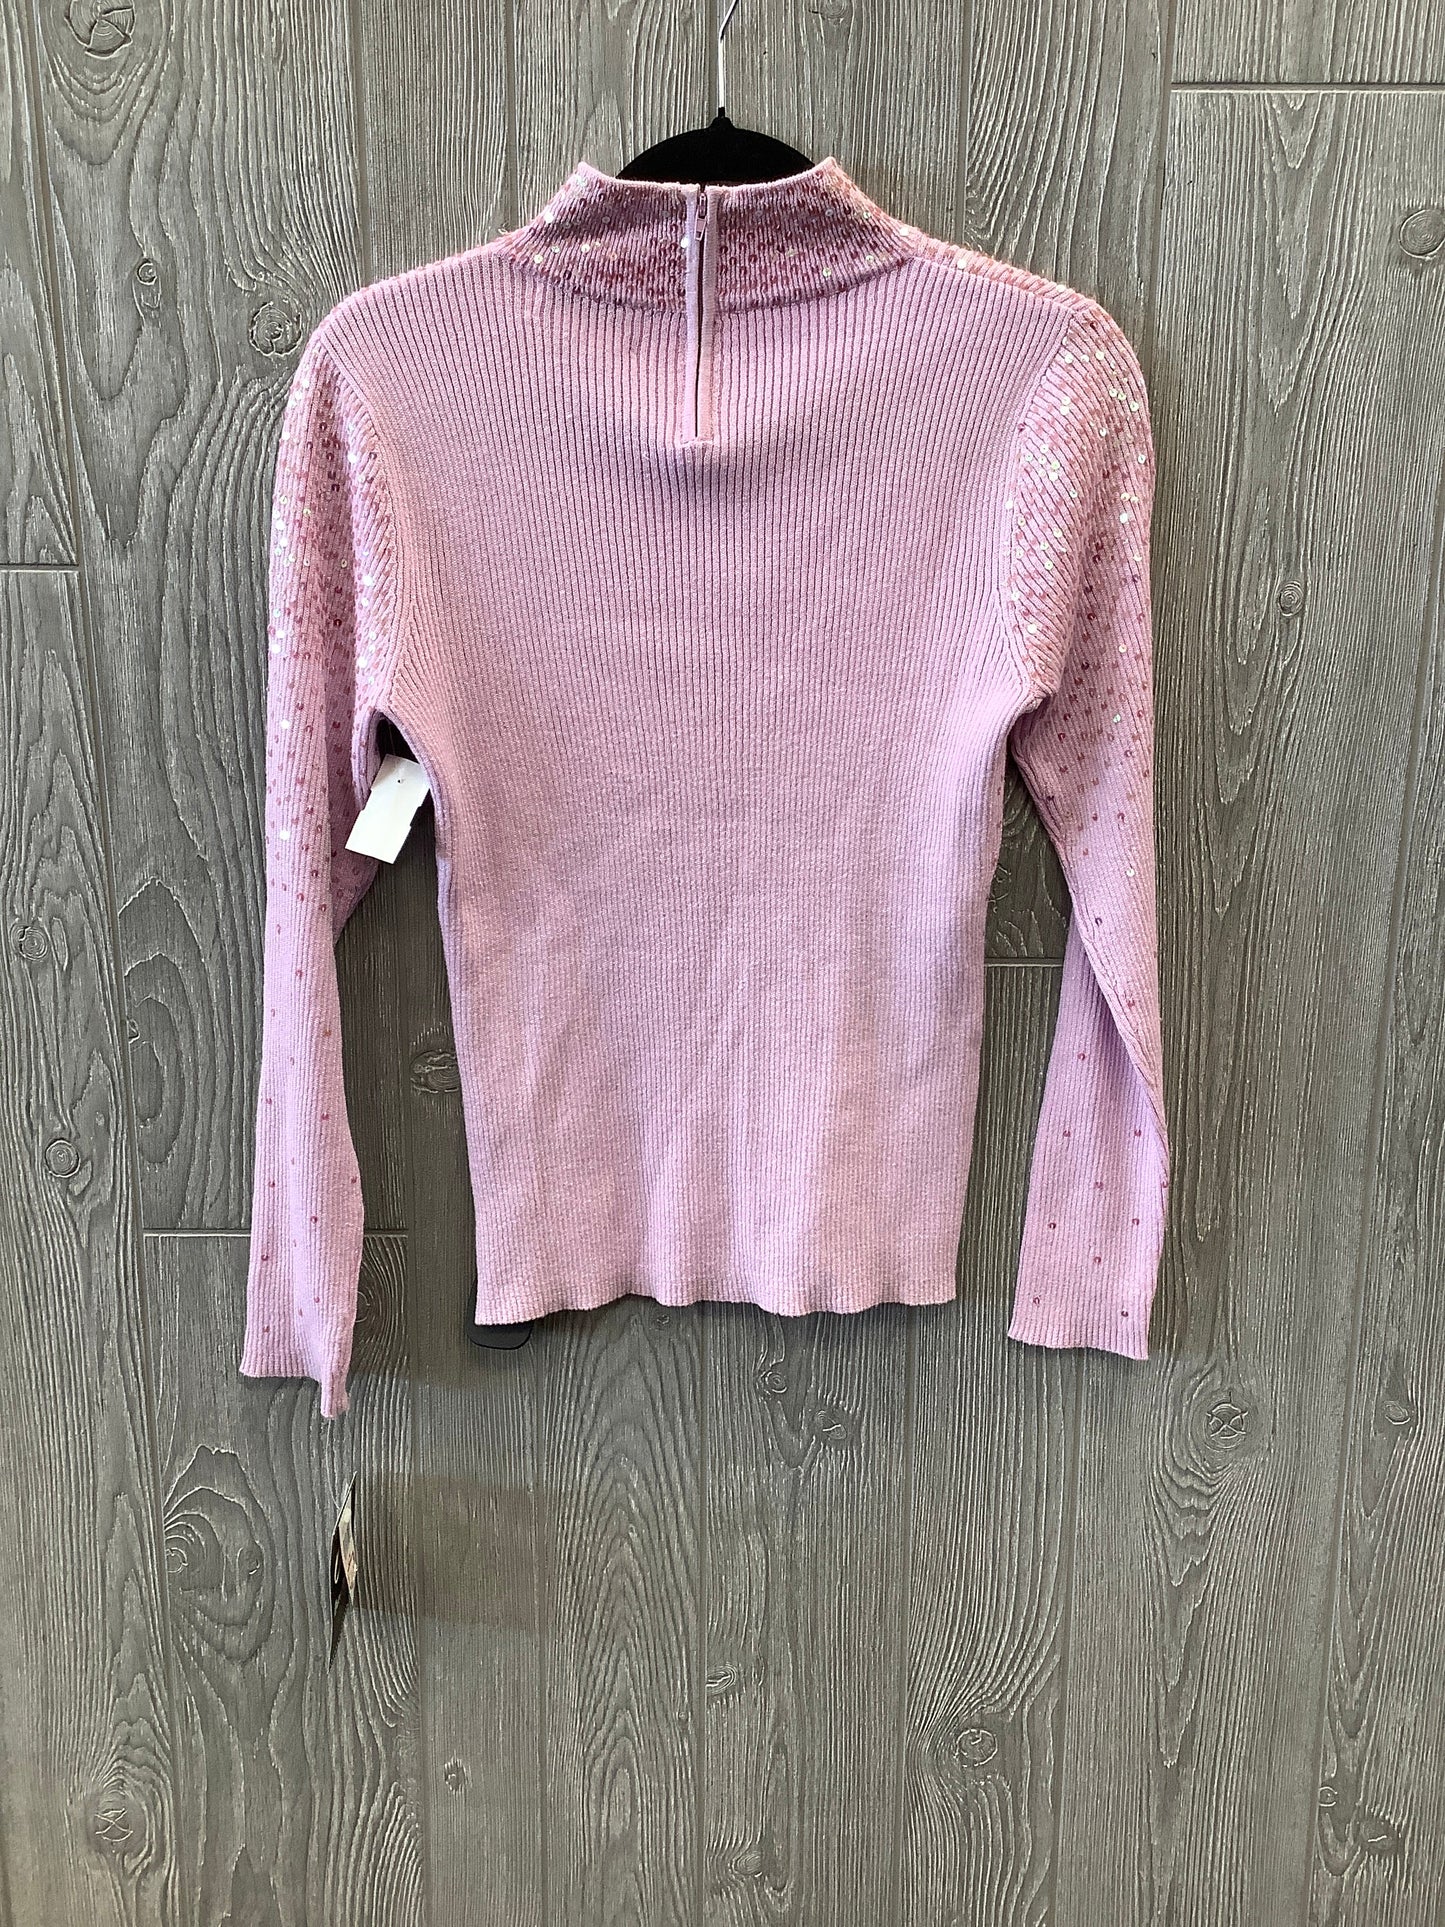 Pink Sweater Clothes Mentor, Size M